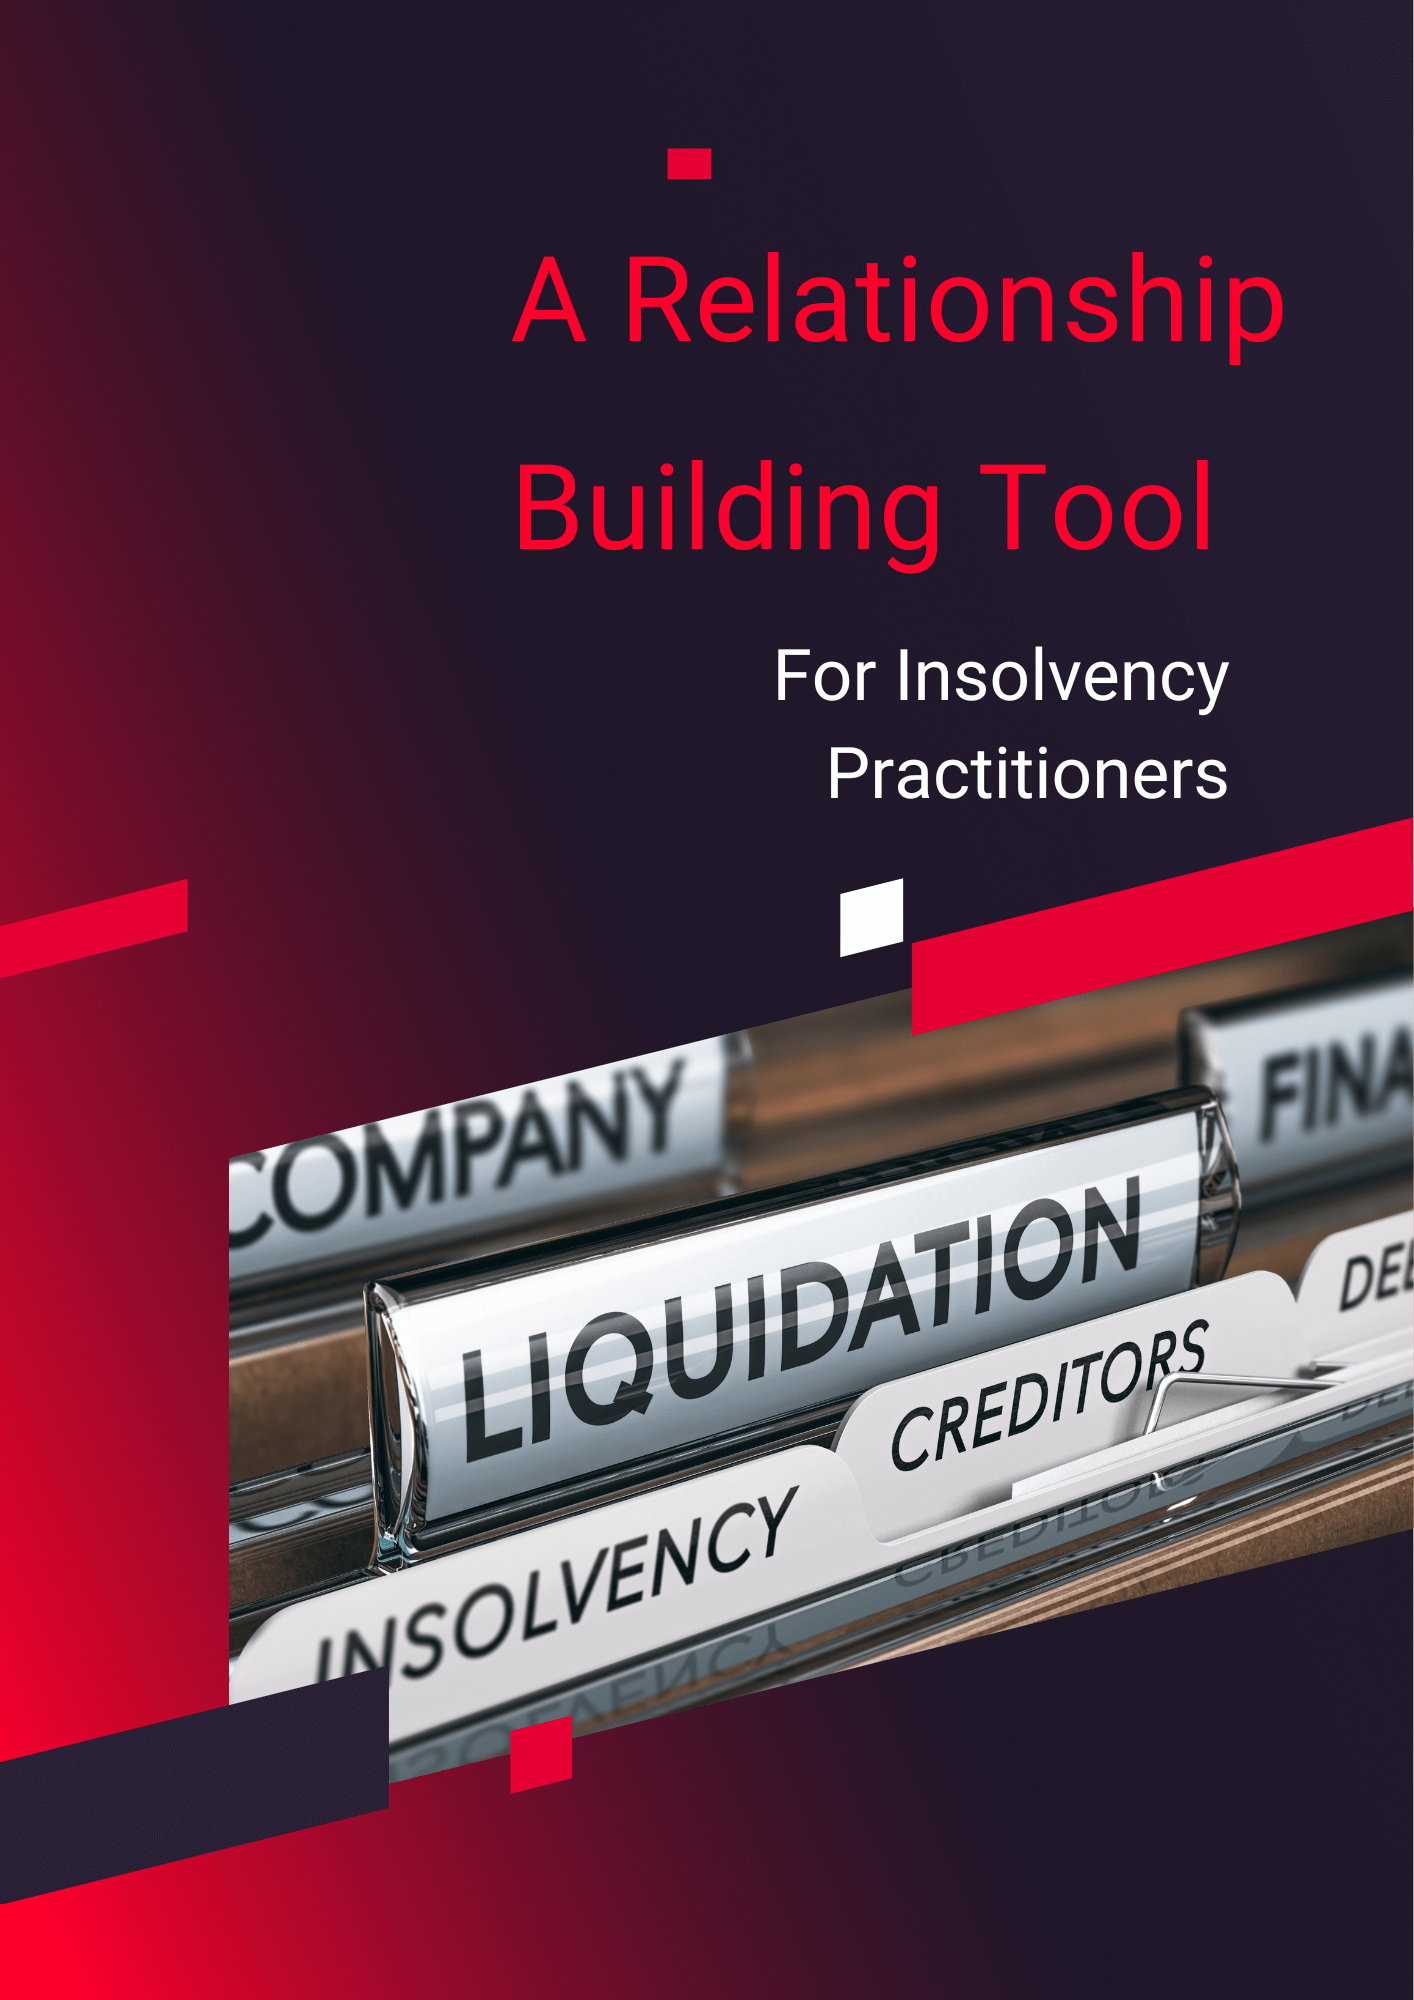 A Relationship Building Tool For Insolvency Practitioners-2